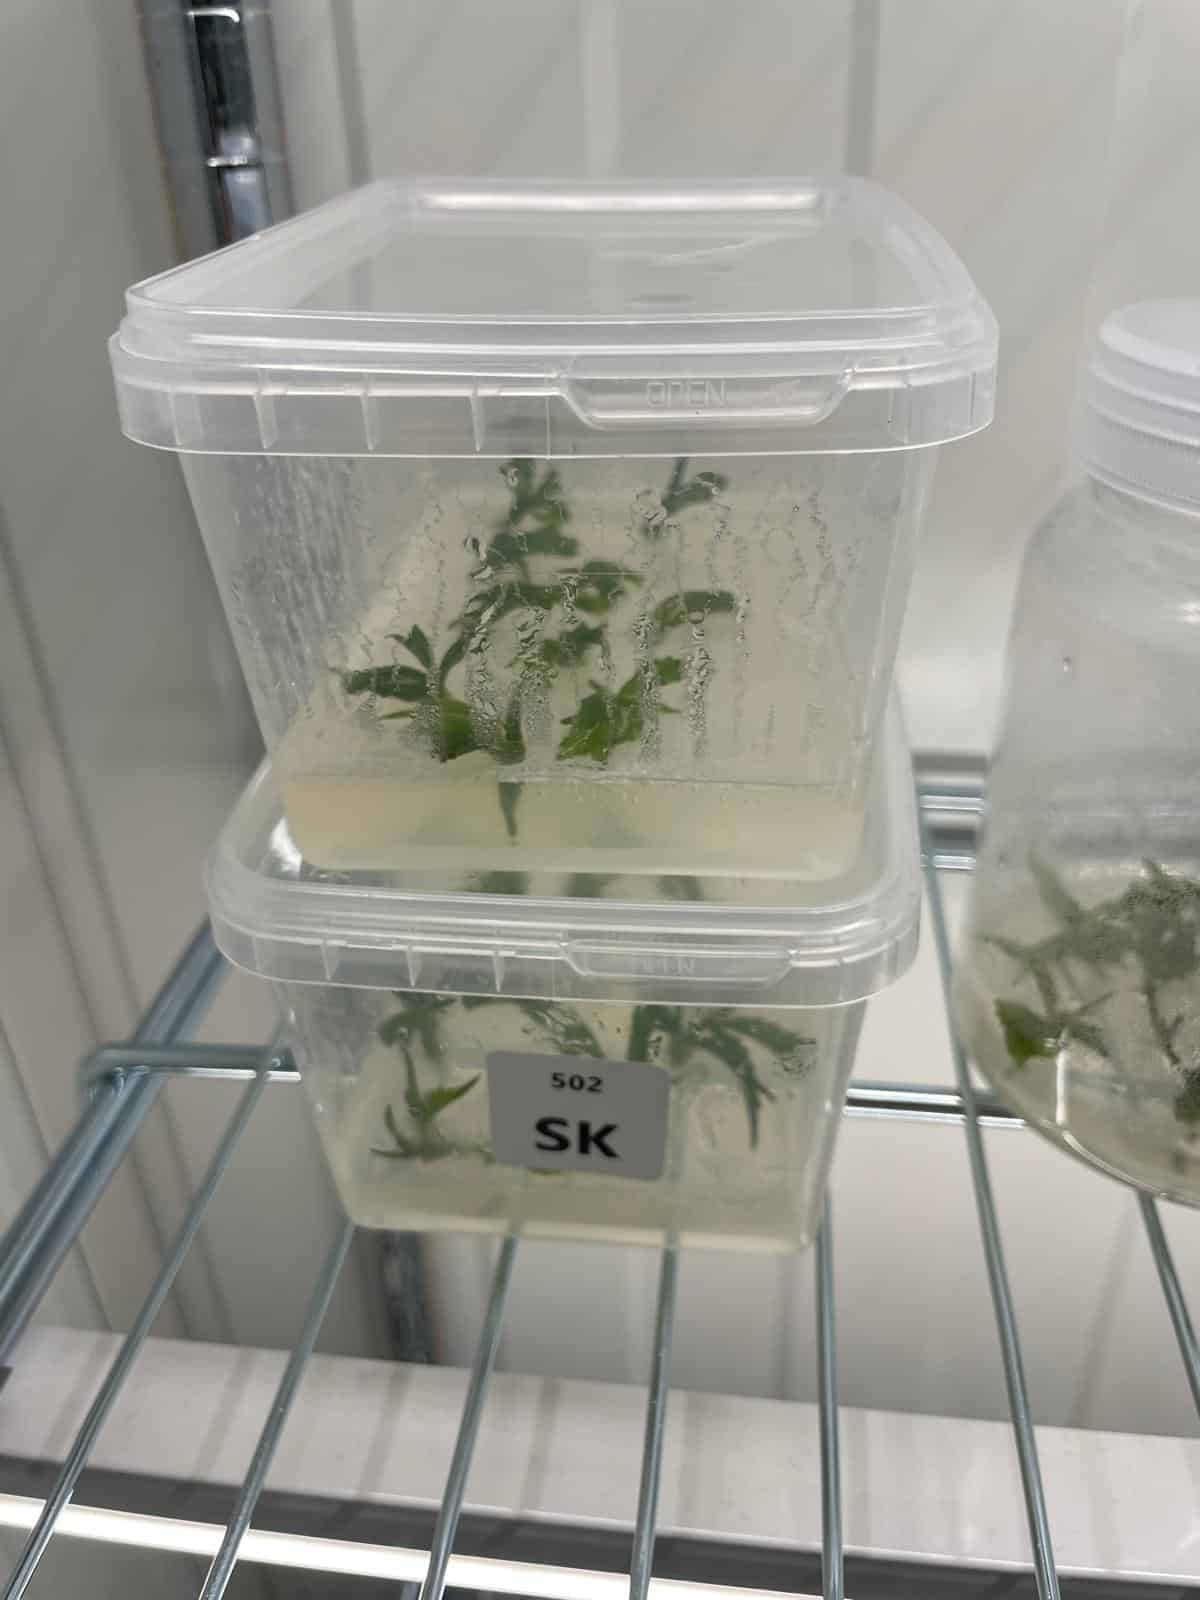 Official Strains: Using the Tissue Culture Method